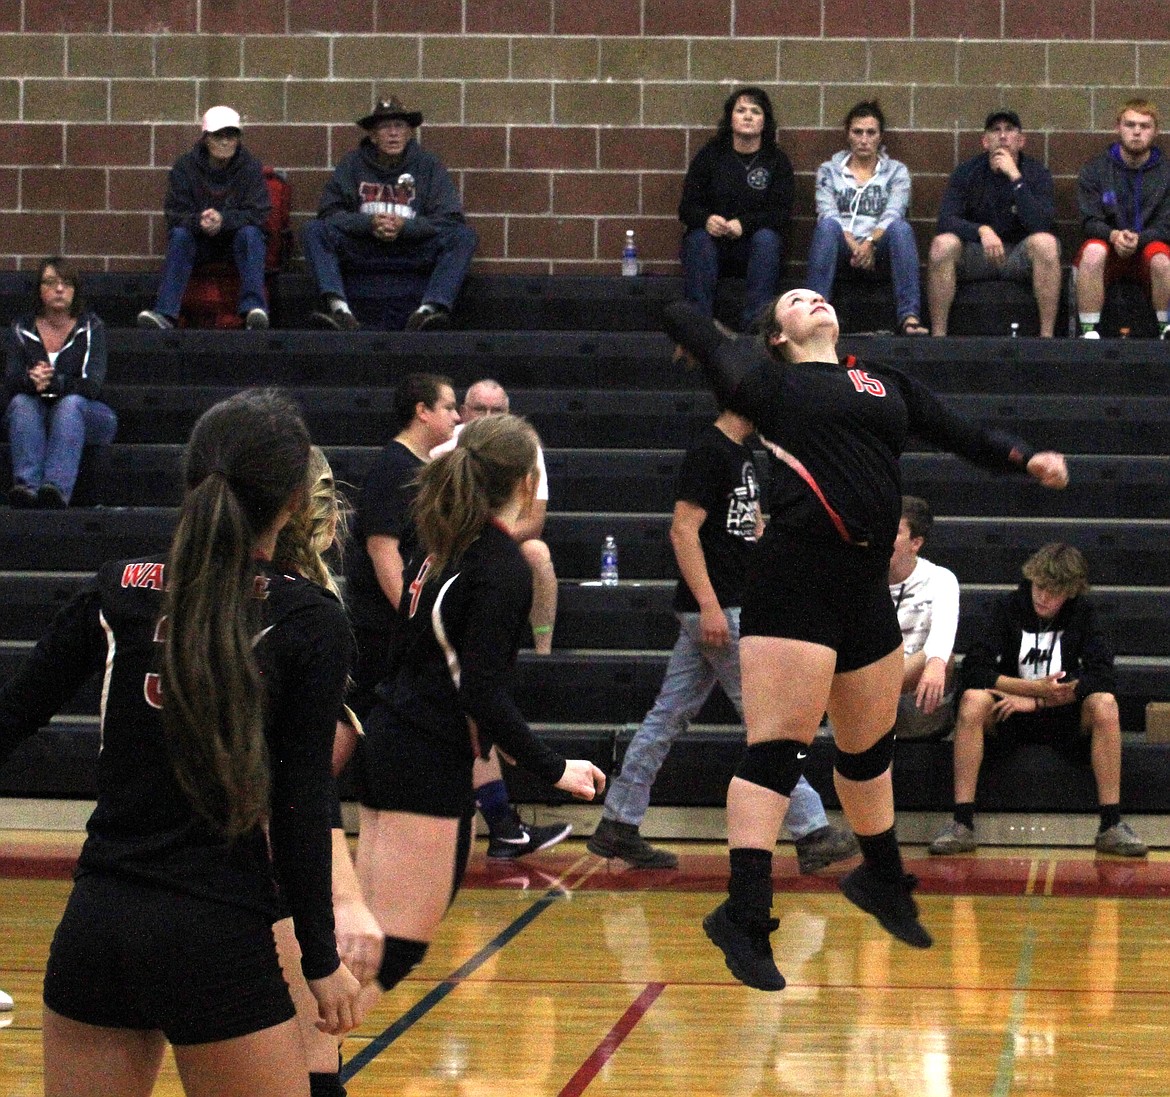 Maggie Howard sets up for a big spike during the opening set of the Miners' match on Tuesday.